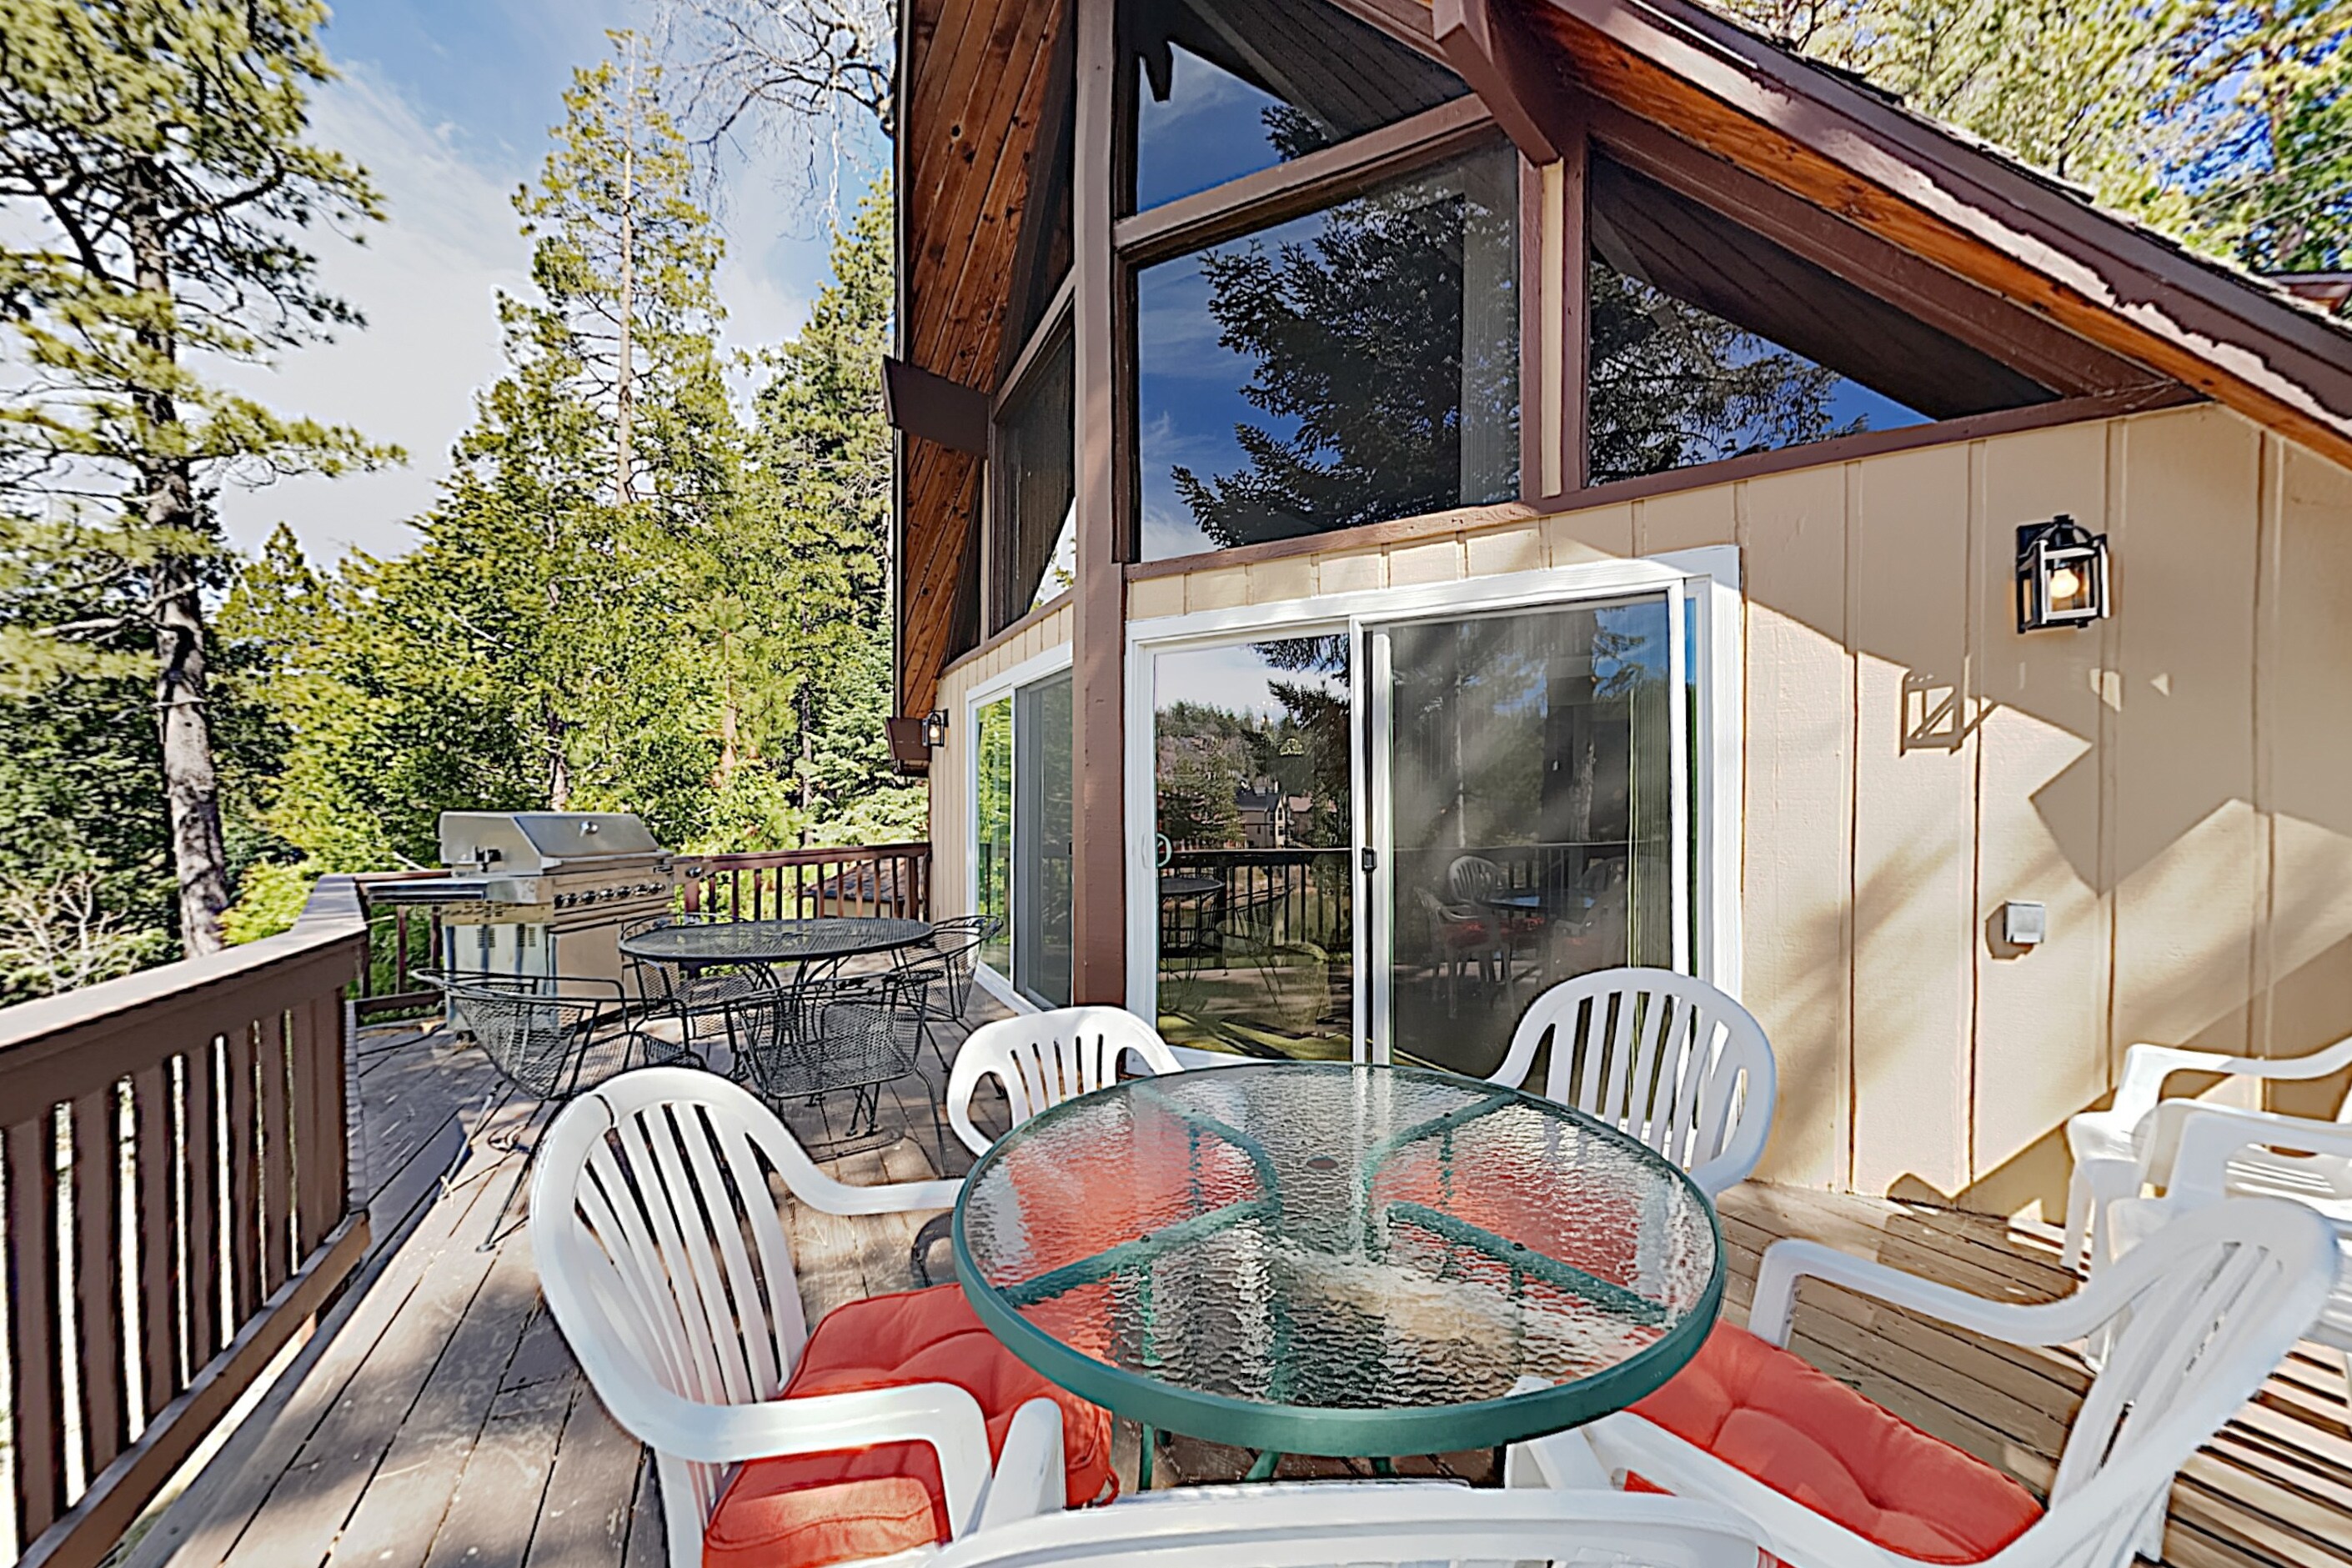 Welcome to Lake Arrowhead! This home is professionally managed by TurnKey Vacation Rentals.